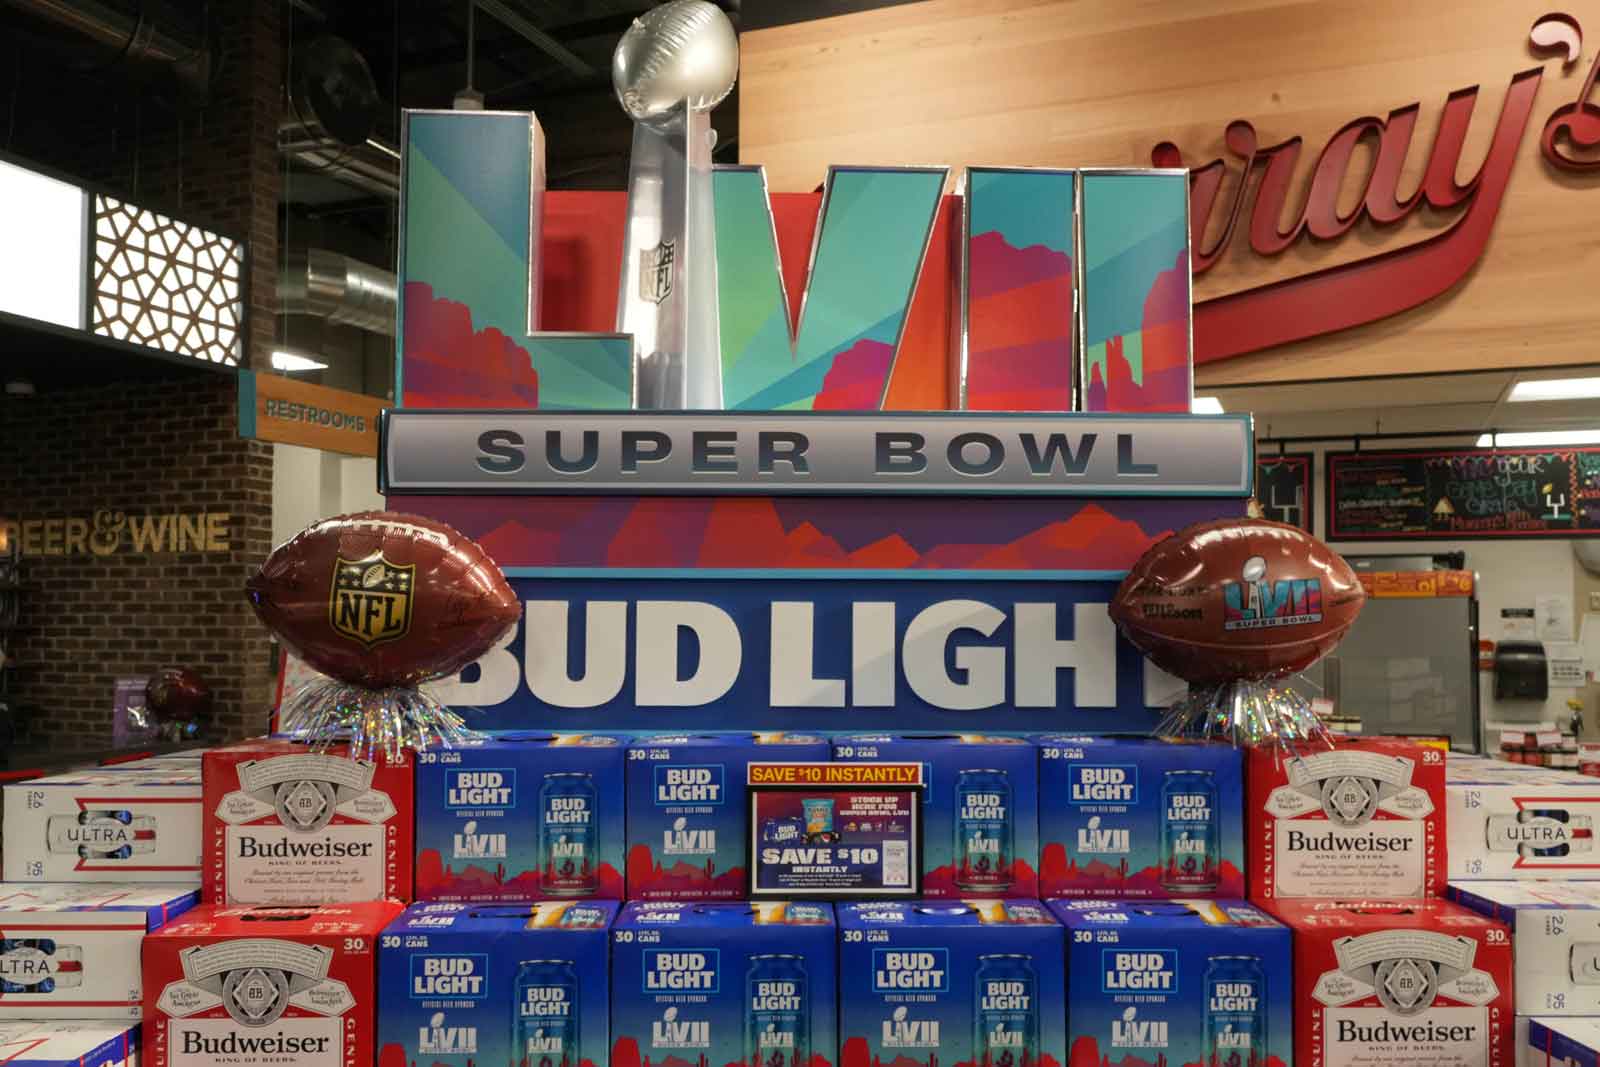 Super Bowl LVII tickets are available  and expensive